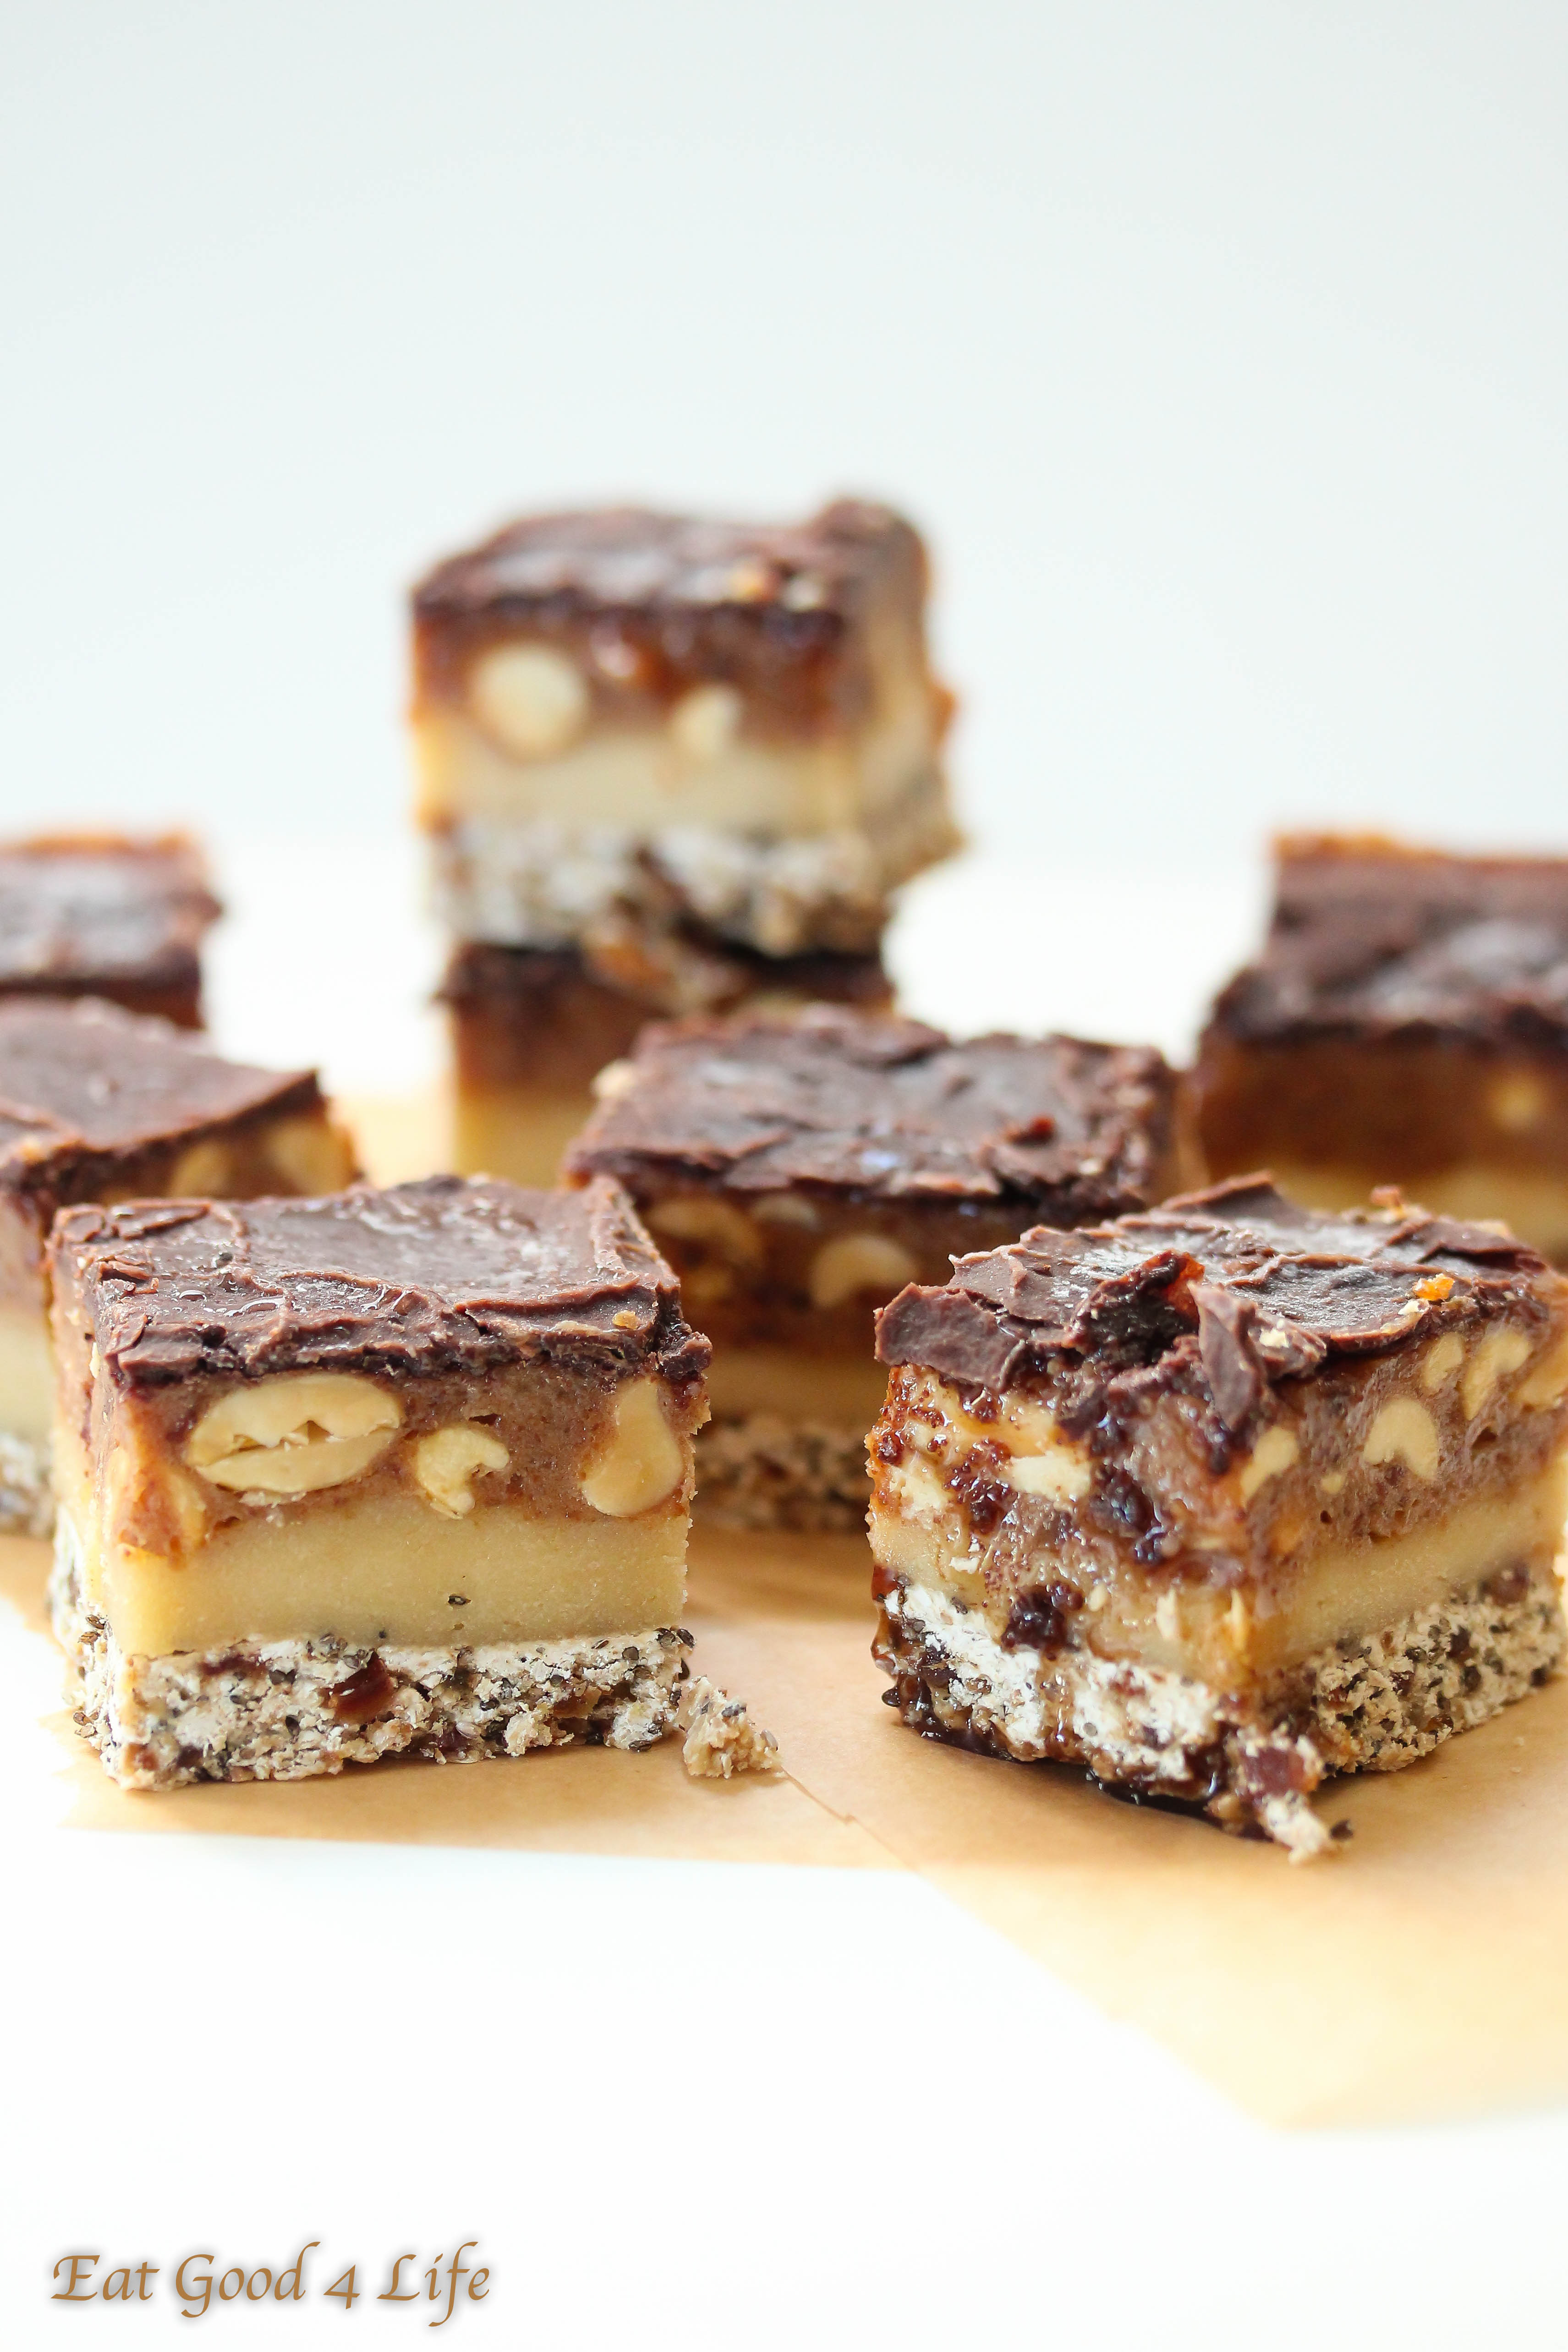 Candy bars- Gluten free and vegan